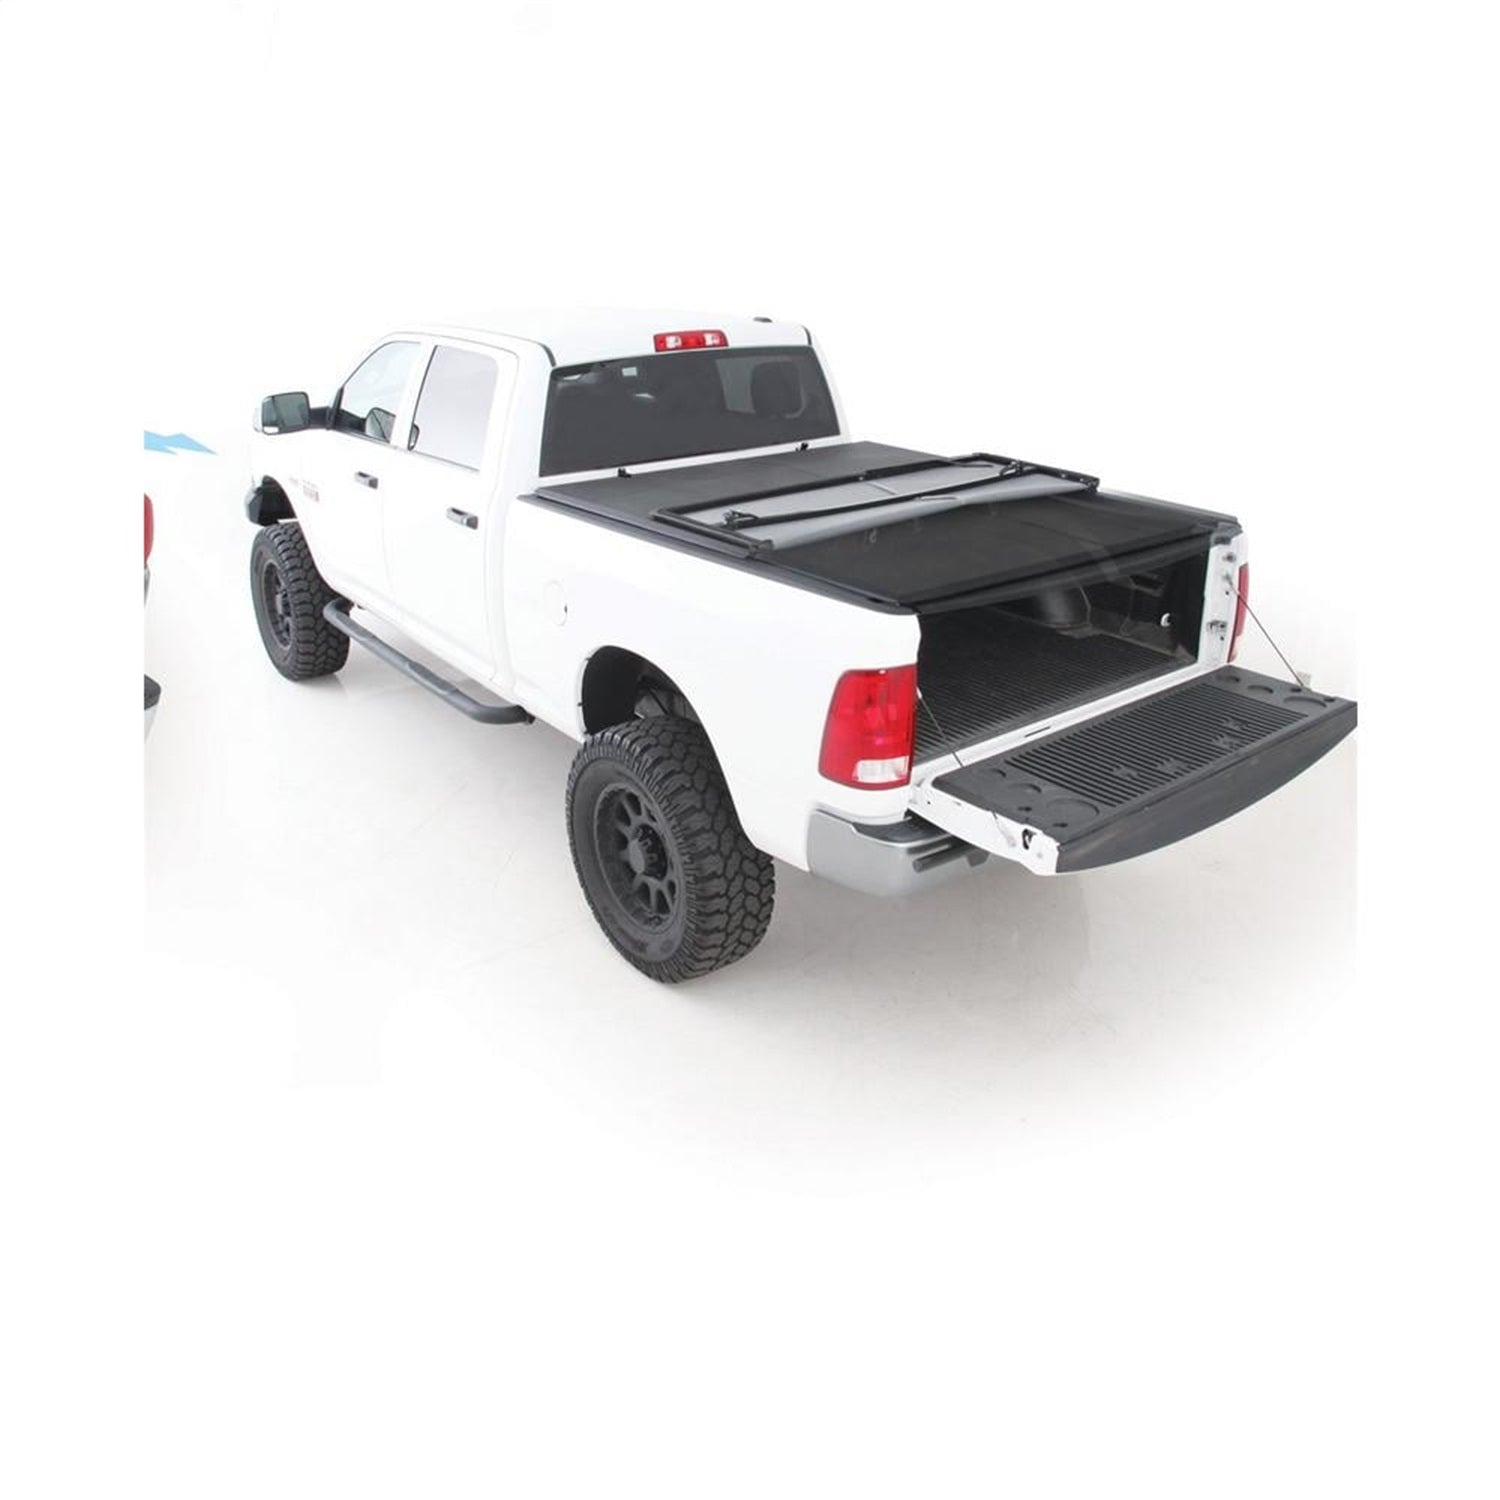 Smittybilt 2640071 Smart Cover Trifold Tonneau Cover Fits 16-19 Tacoma